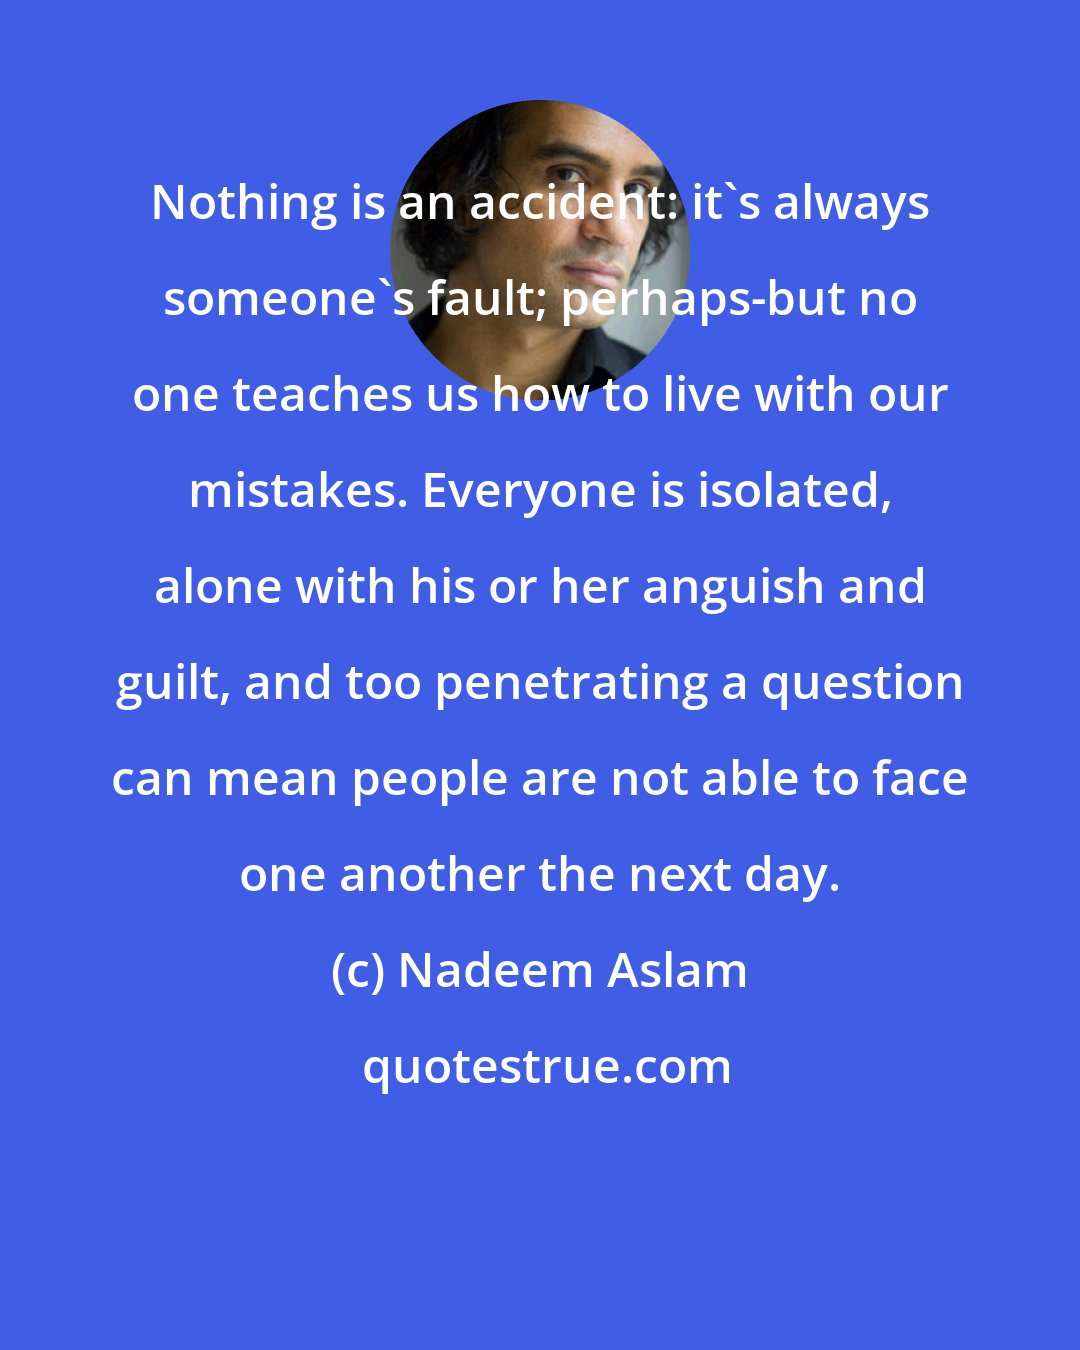 Nadeem Aslam: Nothing is an accident: it's always someone's fault; perhaps-but no one teaches us how to live with our mistakes. Everyone is isolated, alone with his or her anguish and guilt, and too penetrating a question can mean people are not able to face one another the next day.